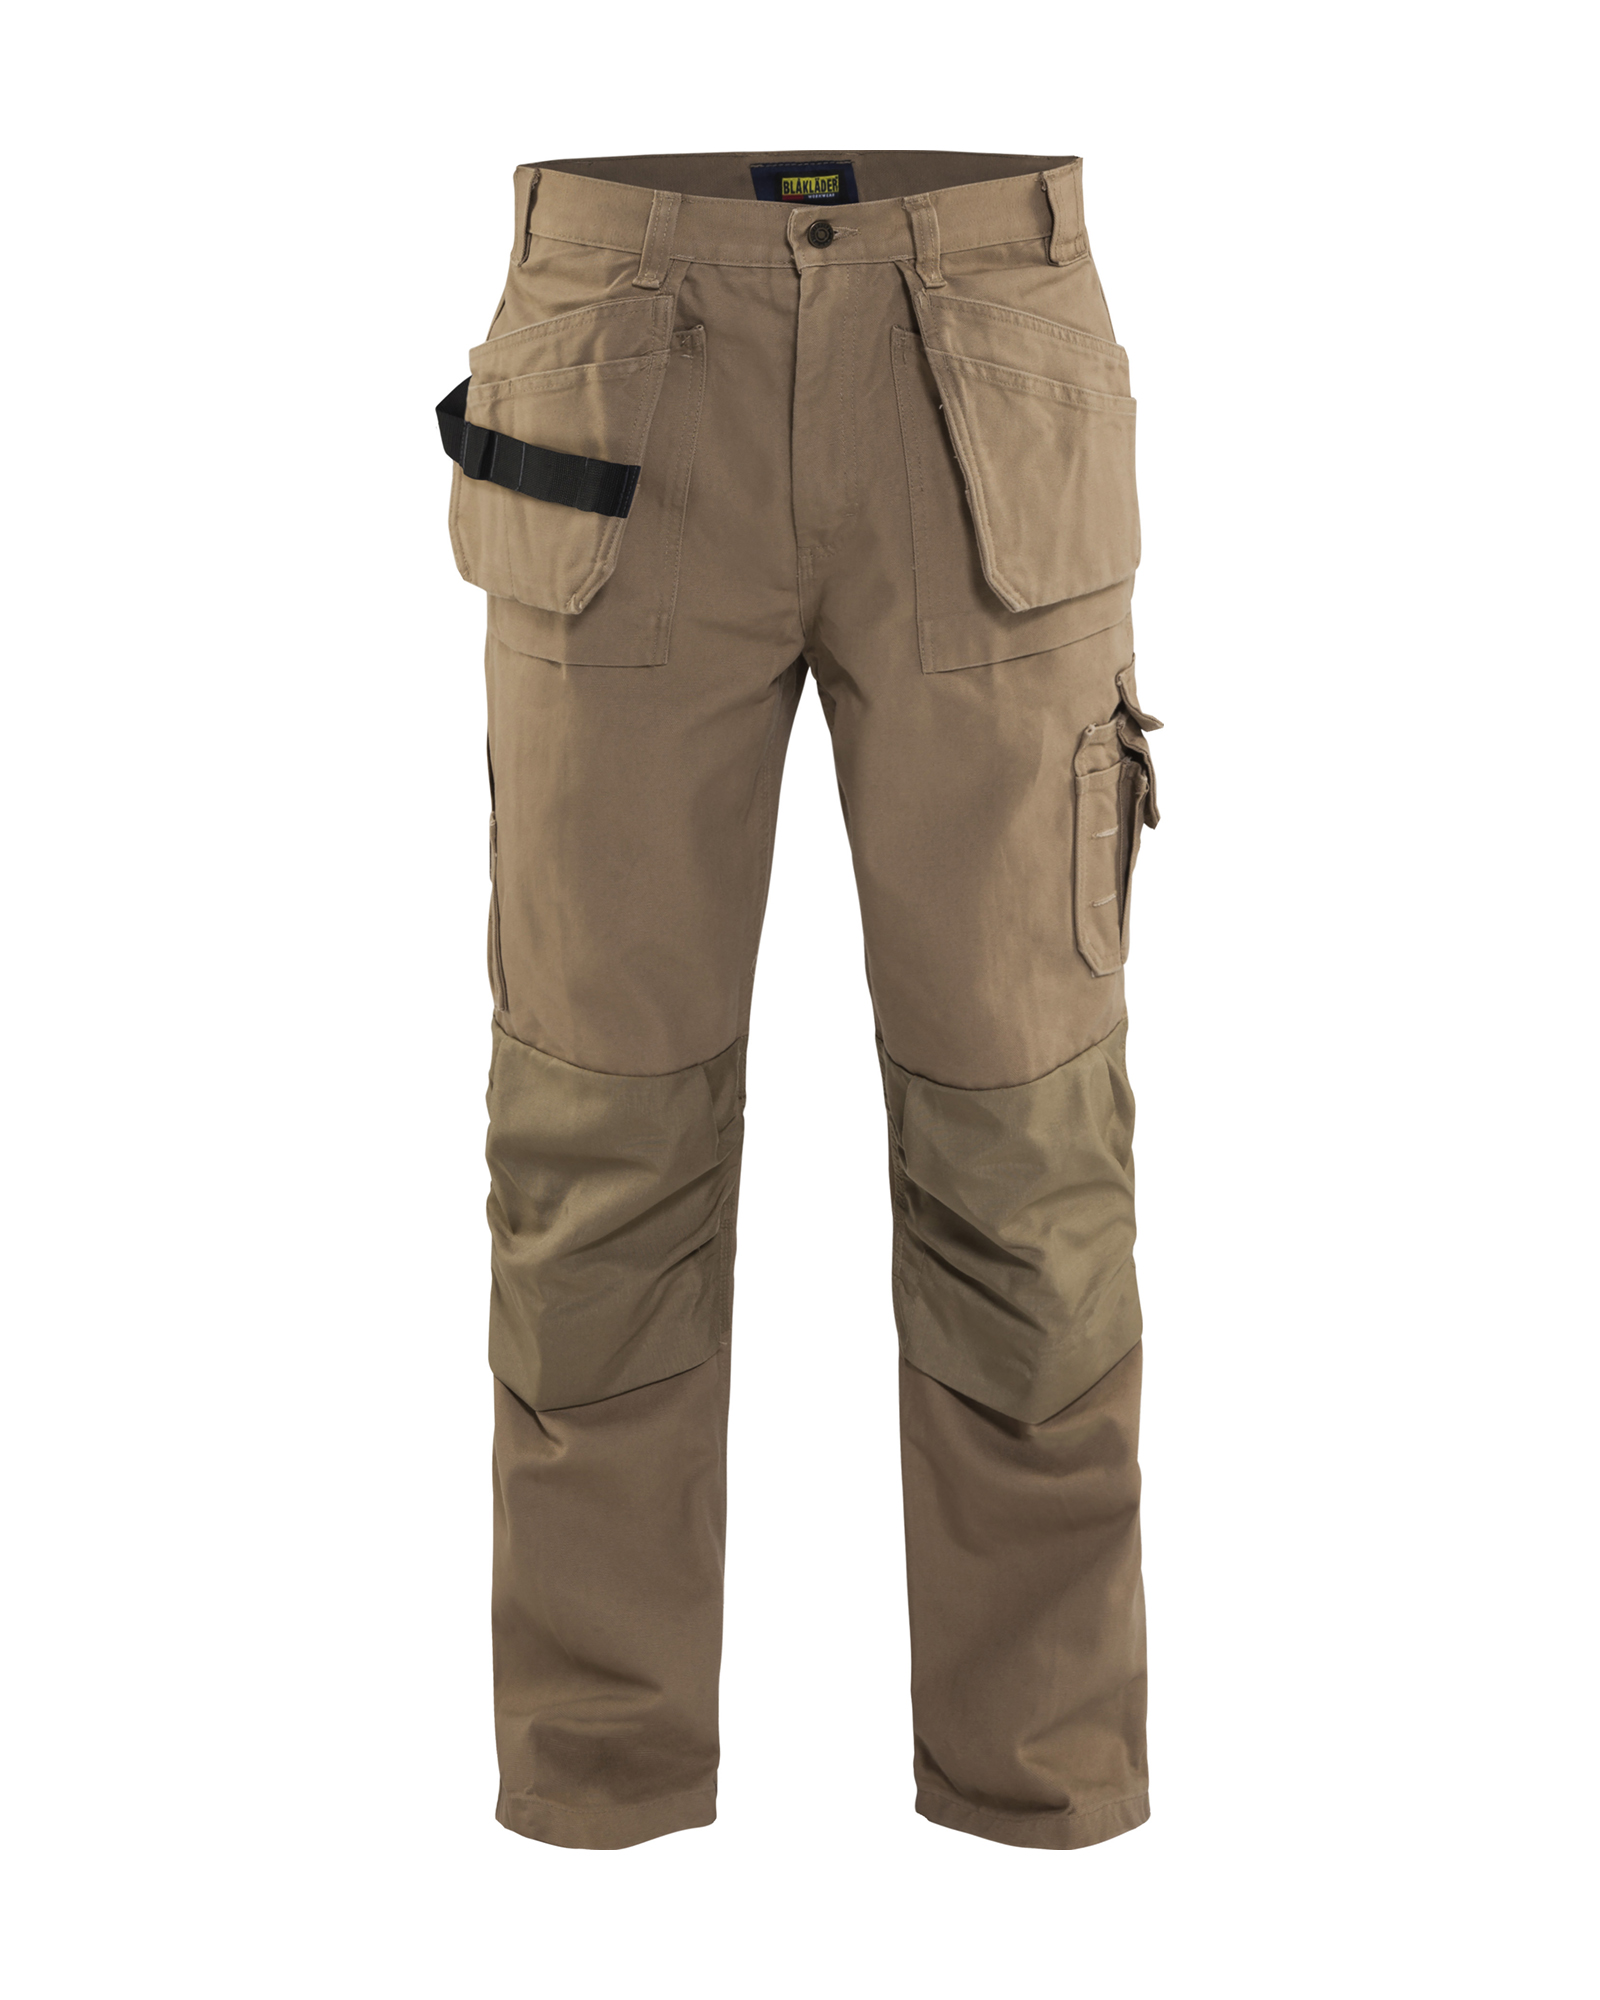 Blaklader Men's Ripstop Durable Lightweight Work Pants with Utility Pockets 